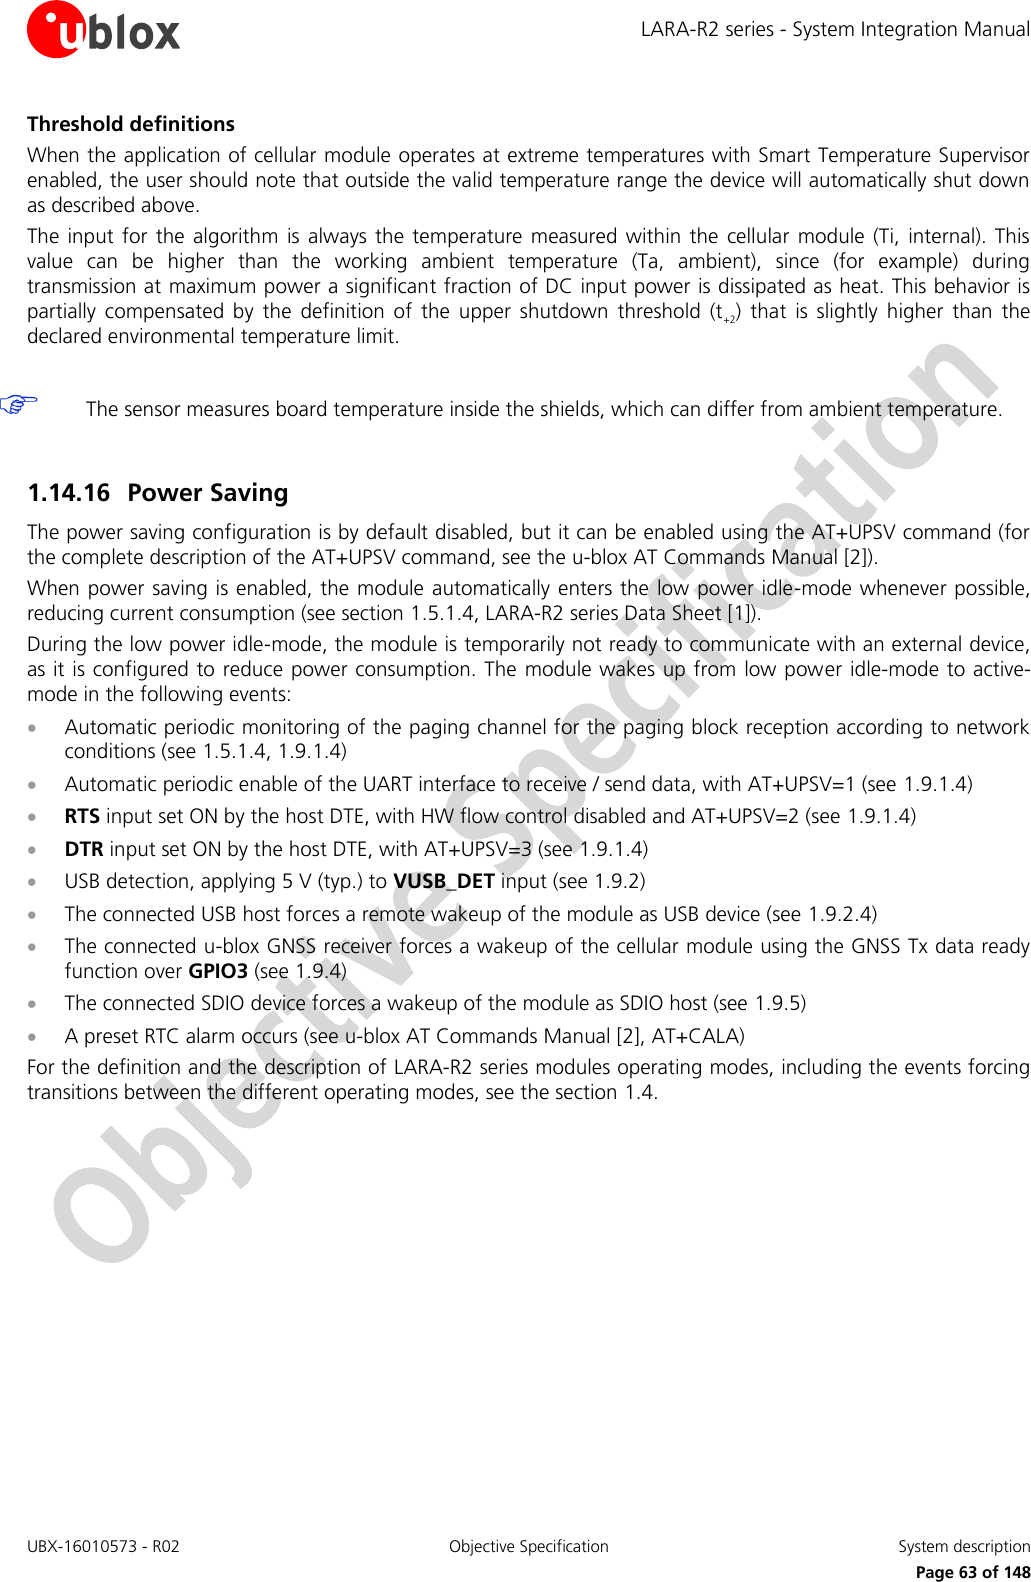 LARA-R2 series - System Integration Manual UBX-16010573 - R02  Objective Specification  System description     Page 63 of 148 Threshold definitions When the application of cellular module operates at extreme temperatures with Smart Temperature Supervisor enabled, the user should note that outside the valid temperature range the device will automatically shut down as described above. The  input  for  the  algorithm is  always  the  temperature  measured  within the  cellular  module  (Ti,  internal).  This value  can  be  higher  than  the  working  ambient  temperature  (Ta,  ambient),  since  (for  example)  during transmission at maximum power a significant fraction of DC input power is dissipated as heat. This behavior is partially  compensated  by  the  definition  of  the  upper  shutdown  threshold  (t+2)  that  is  slightly  higher  than  the declared environmental temperature limit.   The sensor measures board temperature inside the shields, which can differ from ambient temperature.  1.14.16 Power Saving The power saving configuration is by default disabled, but it can be enabled using the AT+UPSV command (for the complete description of the AT+UPSV command, see the u-blox AT Commands Manual [2]). When power saving is enabled, the module automatically enters the low power idle-mode whenever possible, reducing current consumption (see section 1.5.1.4, LARA-R2 series Data Sheet [1]). During the low power idle-mode, the module is temporarily not ready to communicate with an external device, as it is configured to reduce power consumption. The module wakes up from  low power idle-mode to active-mode in the following events:  Automatic periodic monitoring of the paging channel for the paging block reception according to network conditions (see 1.5.1.4, 1.9.1.4)  Automatic periodic enable of the UART interface to receive / send data, with AT+UPSV=1 (see 1.9.1.4)   RTS input set ON by the host DTE, with HW flow control disabled and AT+UPSV=2 (see 1.9.1.4)   DTR input set ON by the host DTE, with AT+UPSV=3 (see 1.9.1.4)   USB detection, applying 5 V (typ.) to VUSB_DET input (see 1.9.2)  The connected USB host forces a remote wakeup of the module as USB device (see 1.9.2.4)  The connected u-blox GNSS receiver forces a wakeup of the cellular module using the GNSS Tx data ready function over GPIO3 (see 1.9.4)  The connected SDIO device forces a wakeup of the module as SDIO host (see 1.9.5)  A preset RTC alarm occurs (see u-blox AT Commands Manual [2], AT+CALA) For the definition and the description of LARA-R2 series modules operating modes, including the events forcing transitions between the different operating modes, see the section 1.4.  